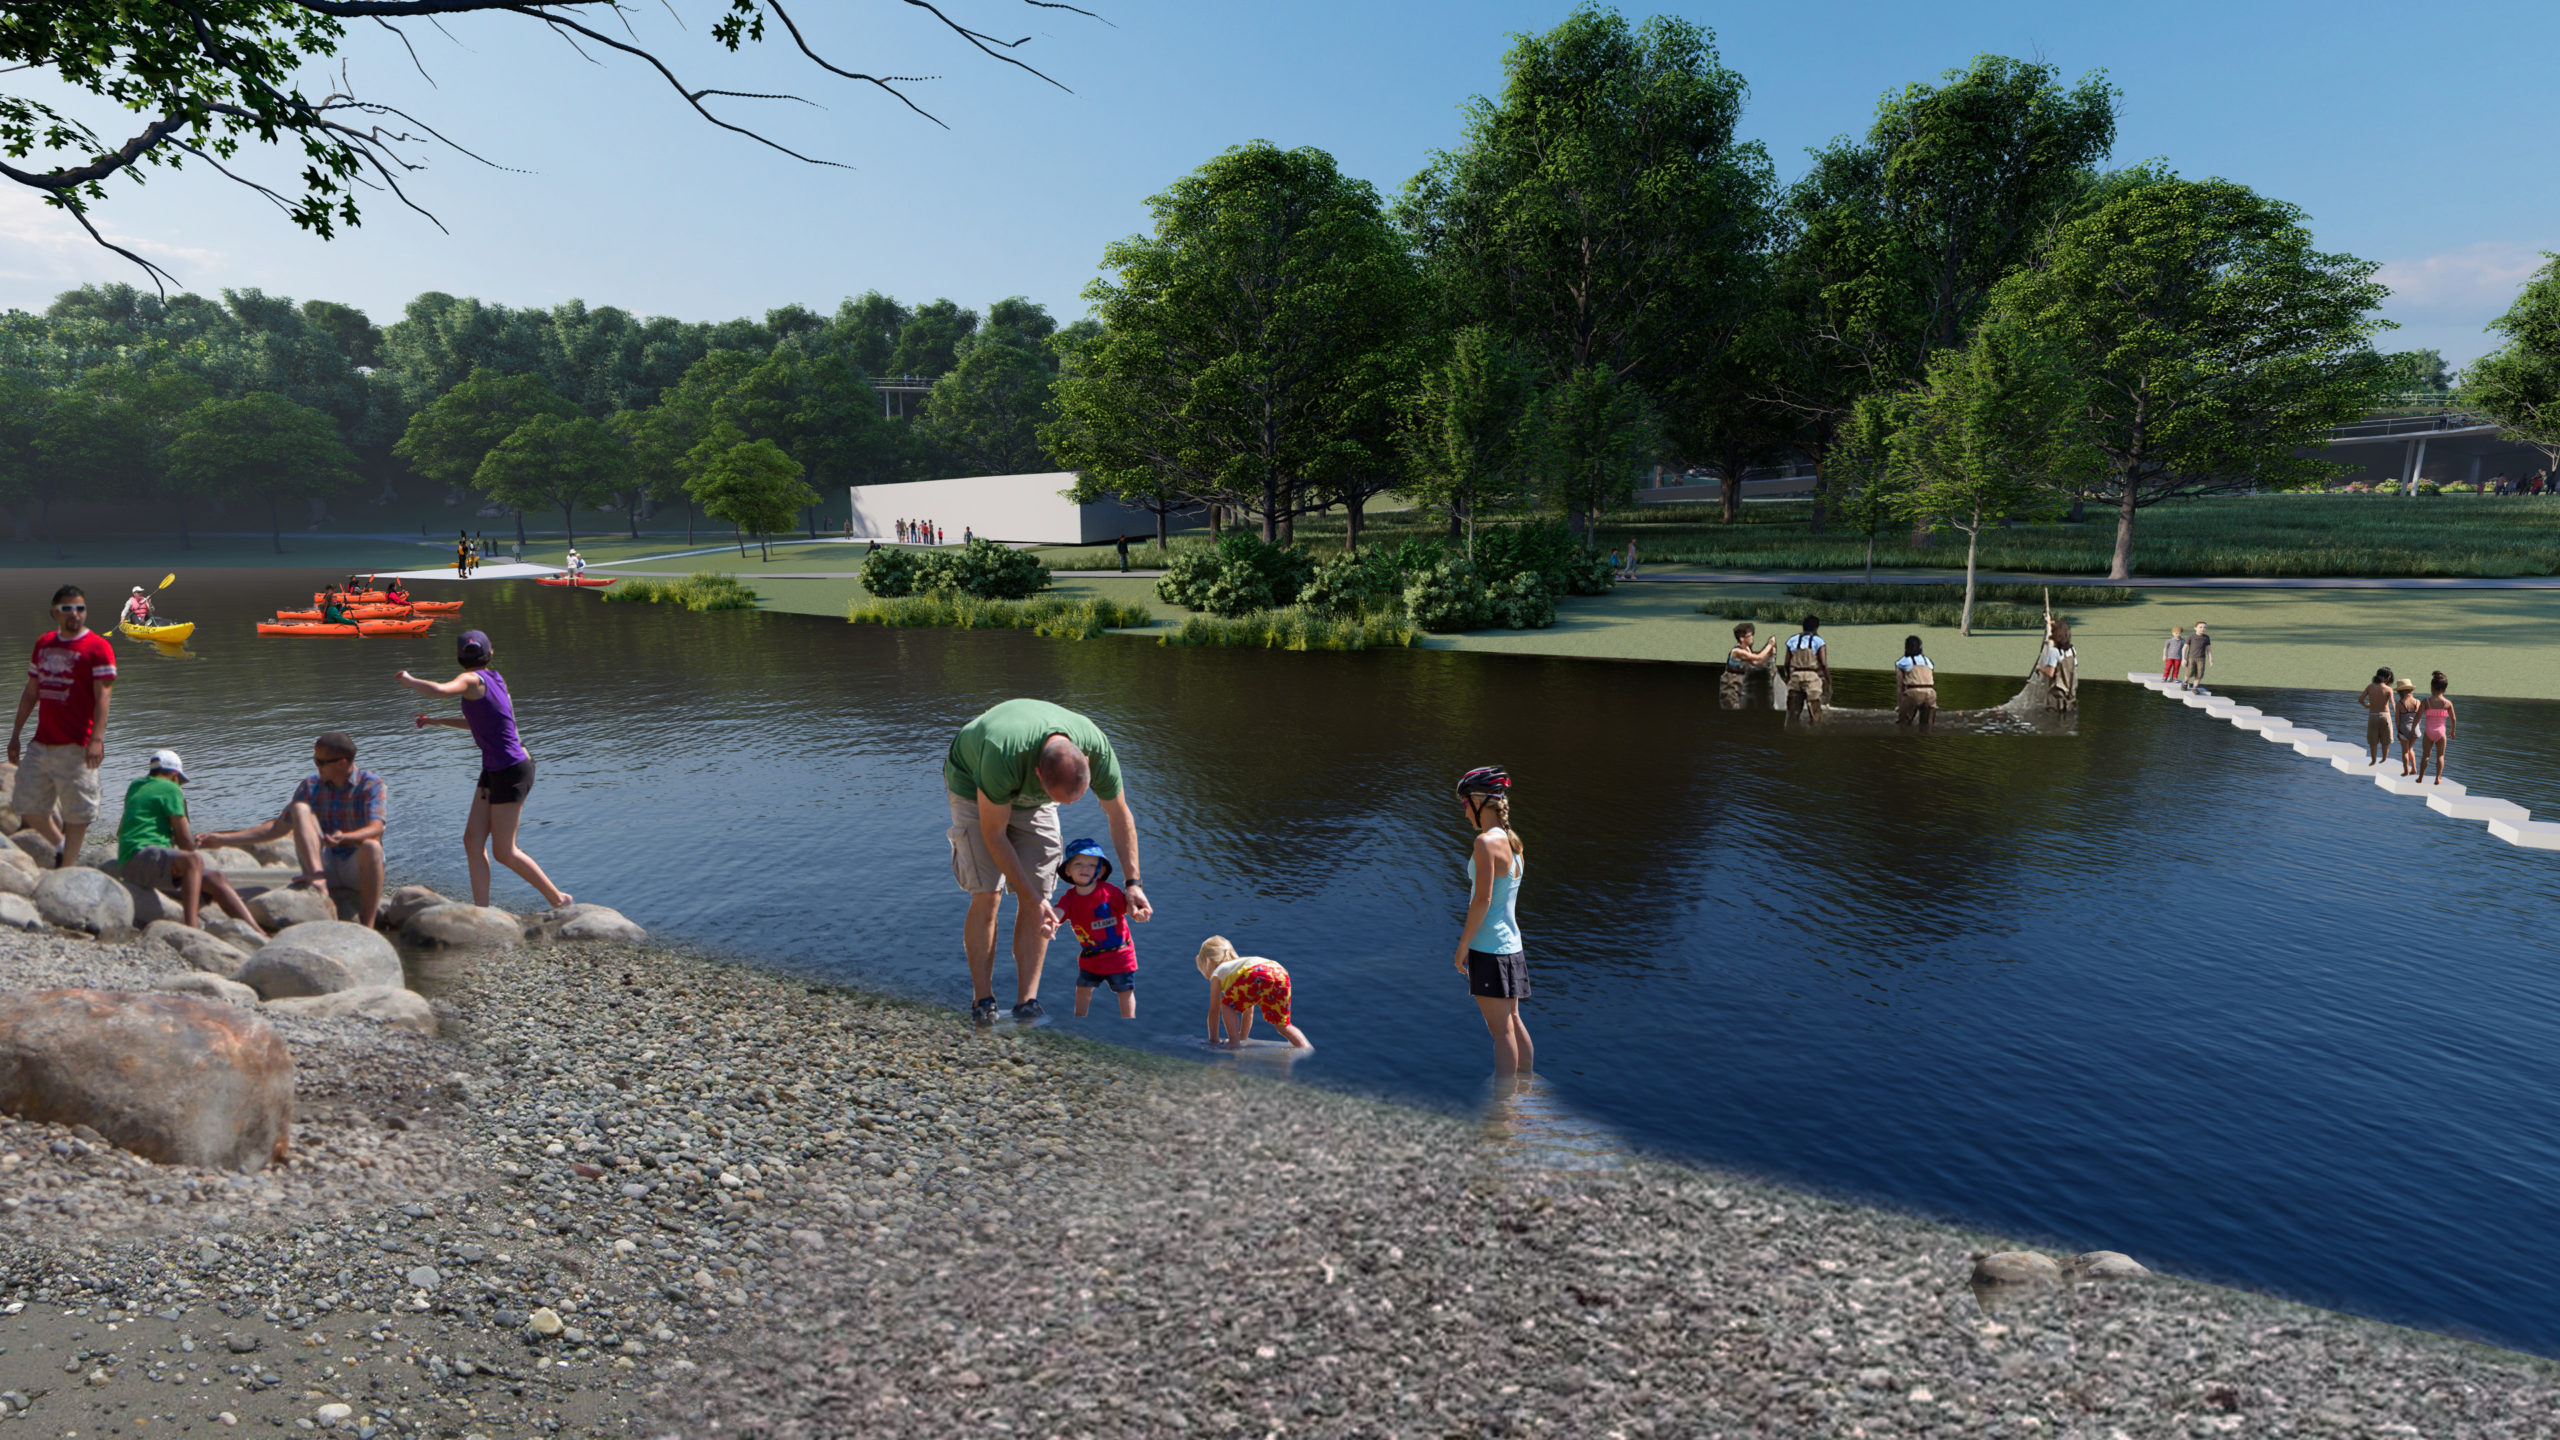 St. Paul reveals updated Mississippi River Learning Center design concept to community